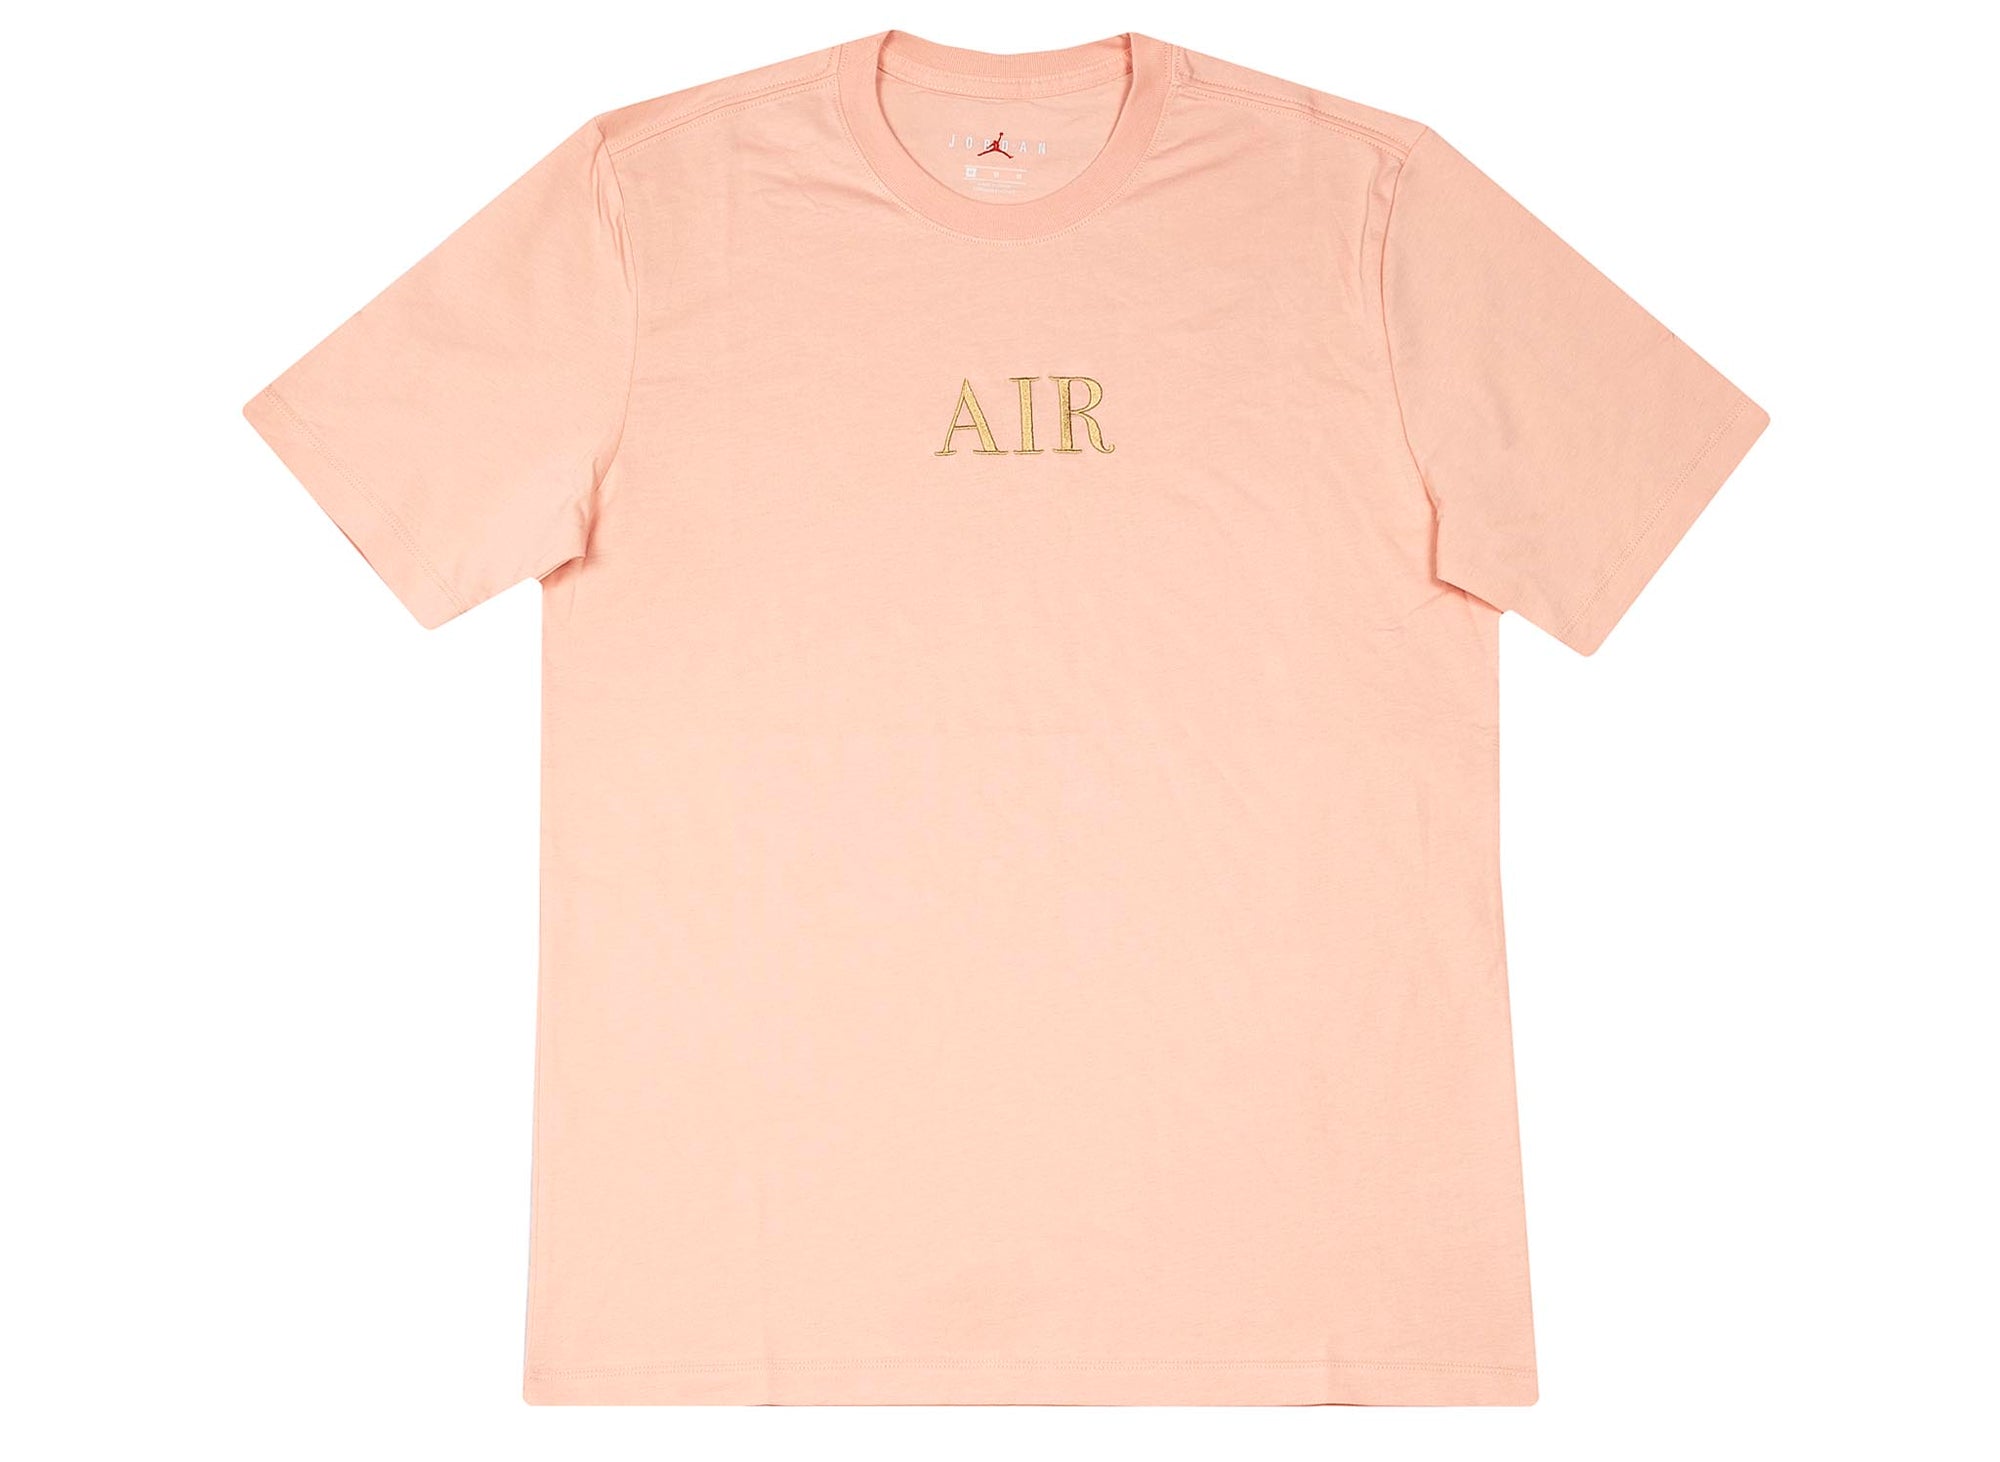 coral stardust nike shirt release date 